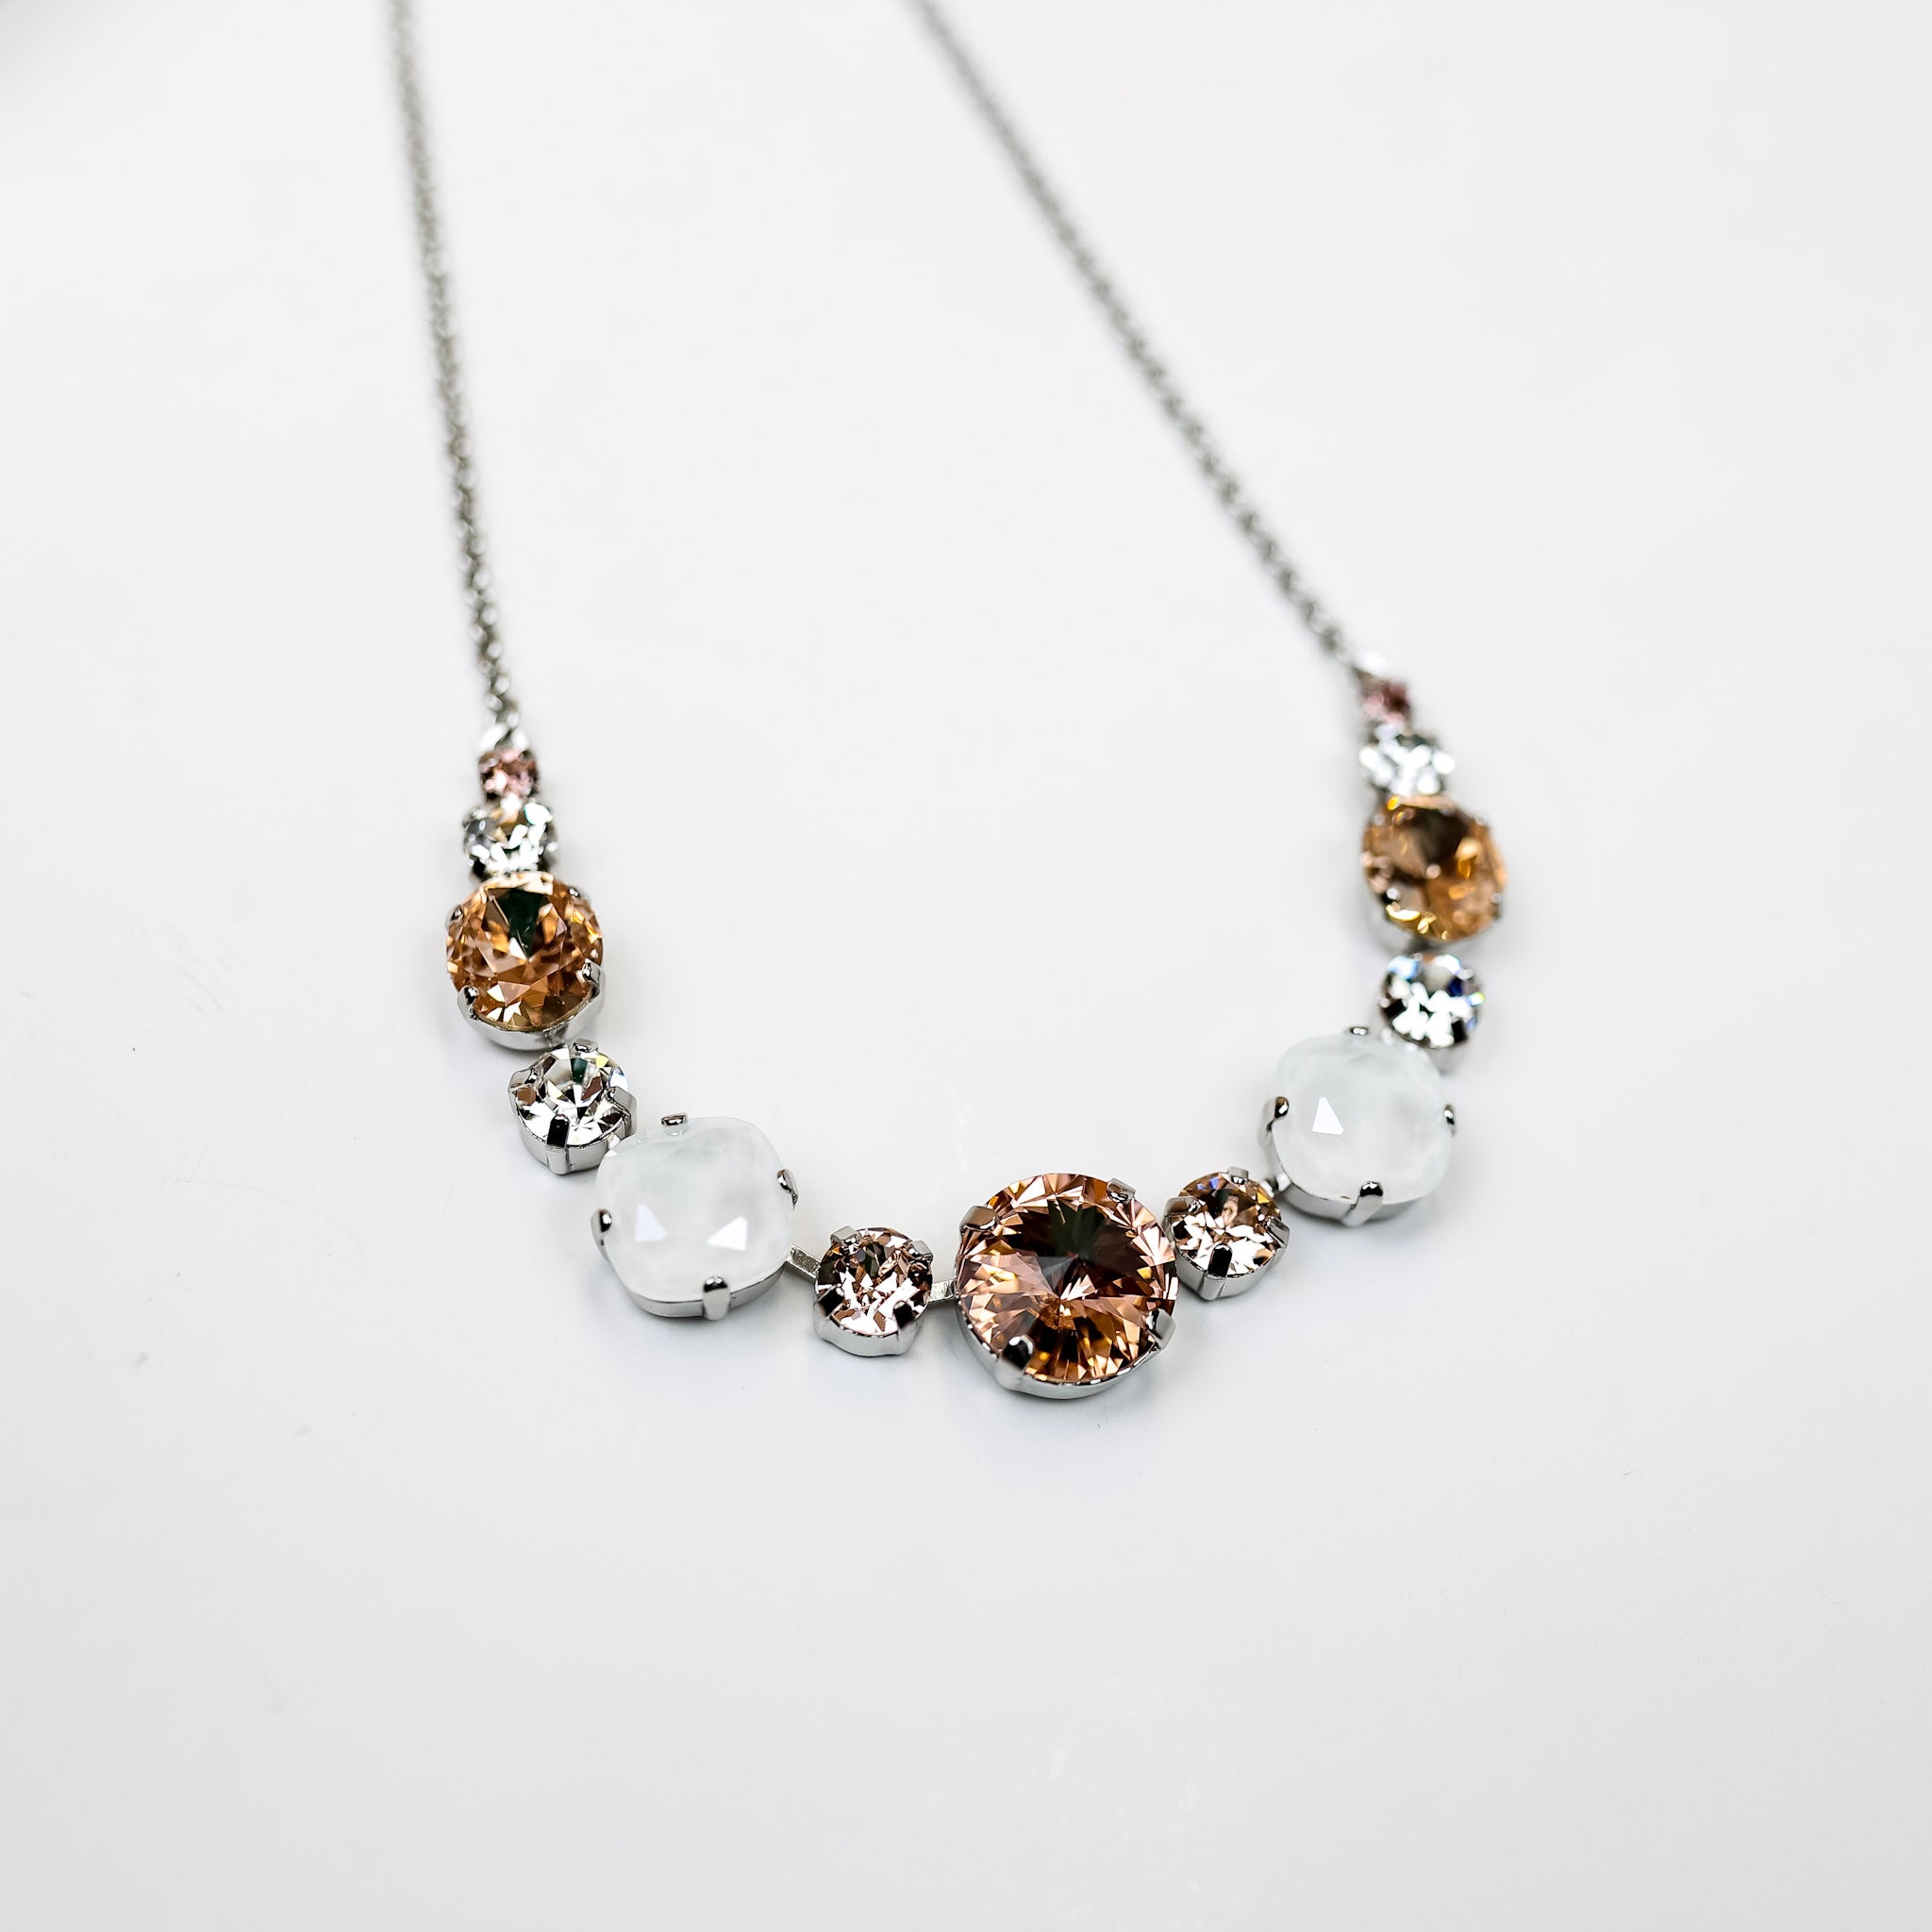 A silver-tone chain necklace with a mix of cushion cut crystals in different sizes and alternates in ivory, clear, and blush color crystals.